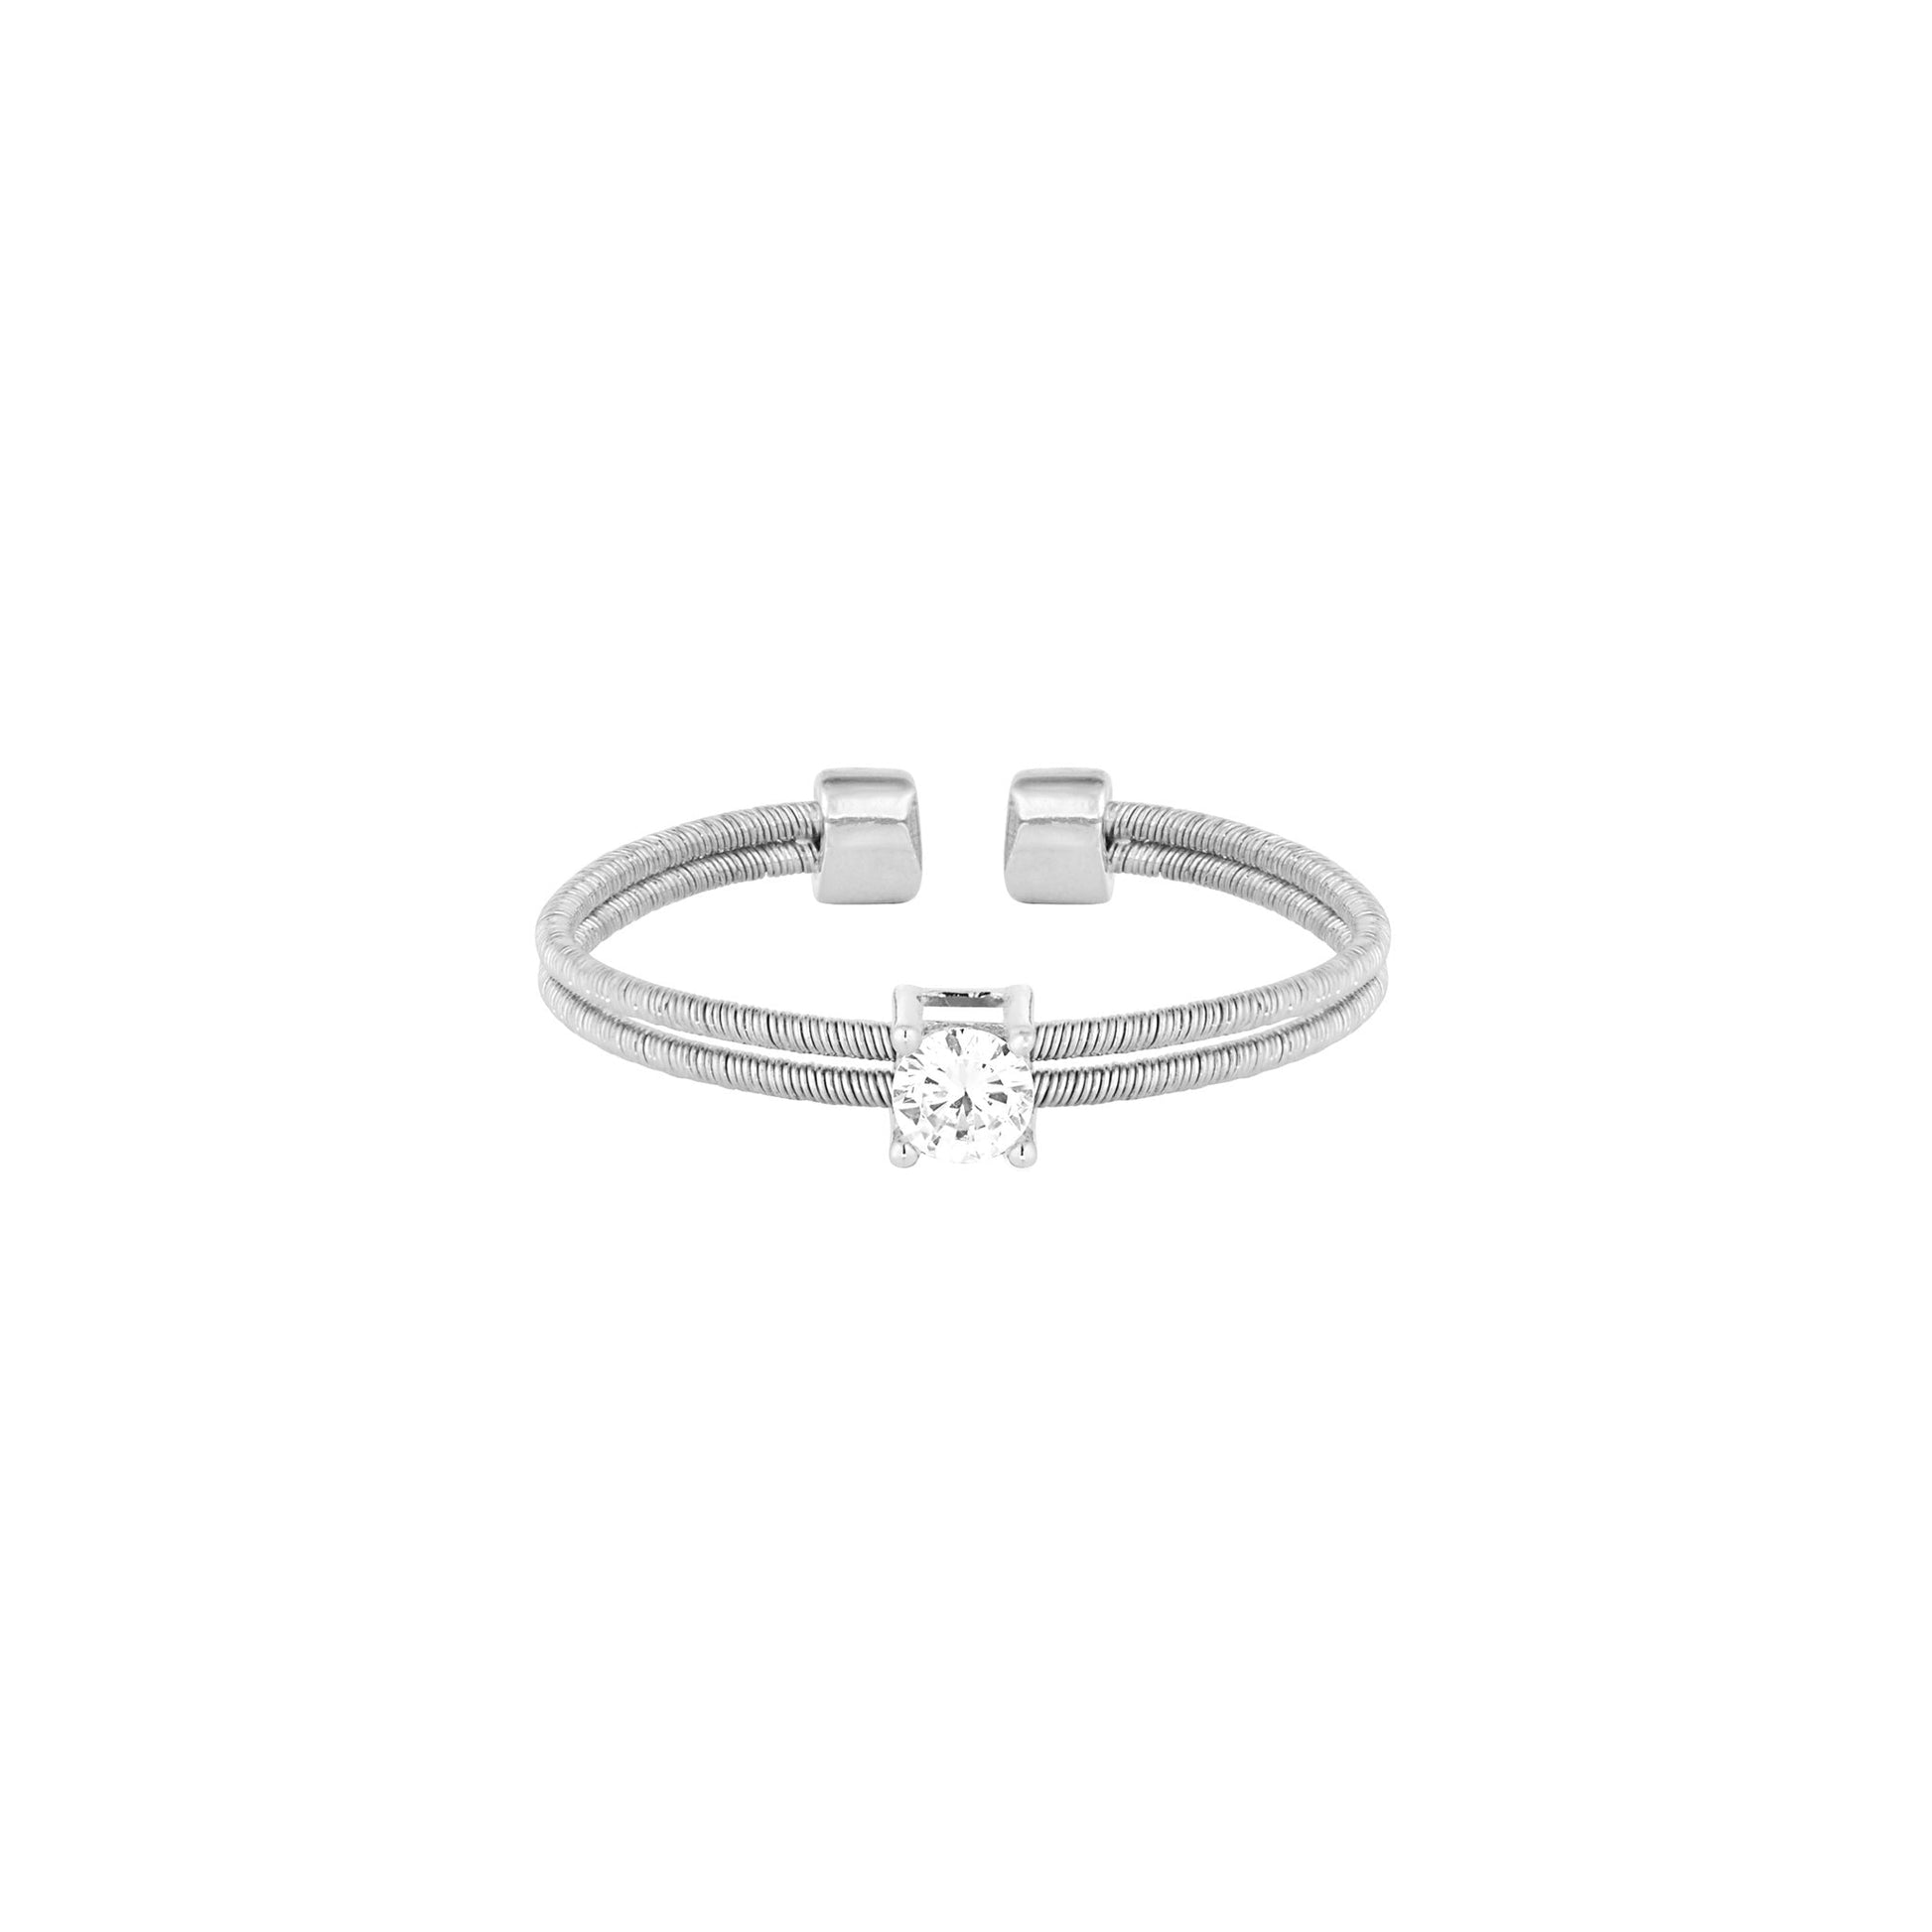 A solitaire flexible cable ring with simulated diamond displayed on a neutral white background.